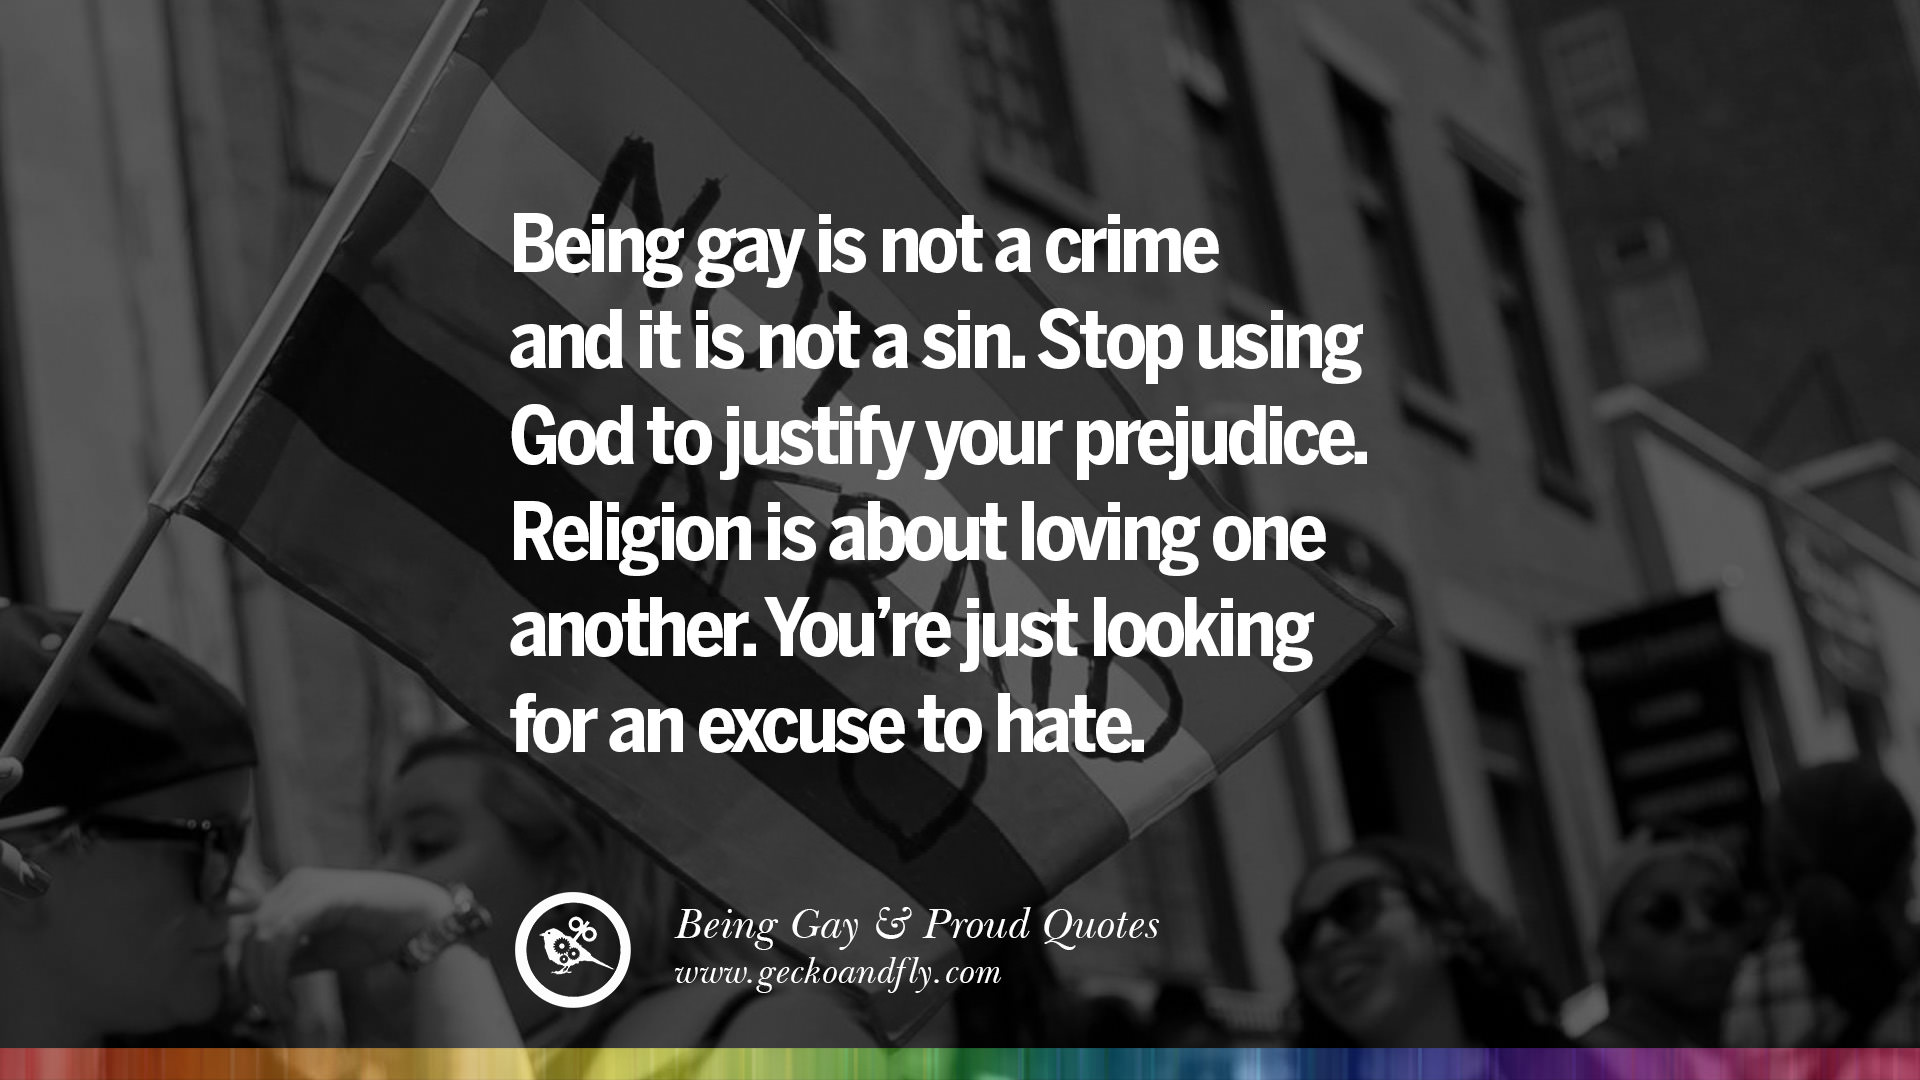 35 Quotes About Gay Pride, Pro LGBT, Homophobia and Marriage